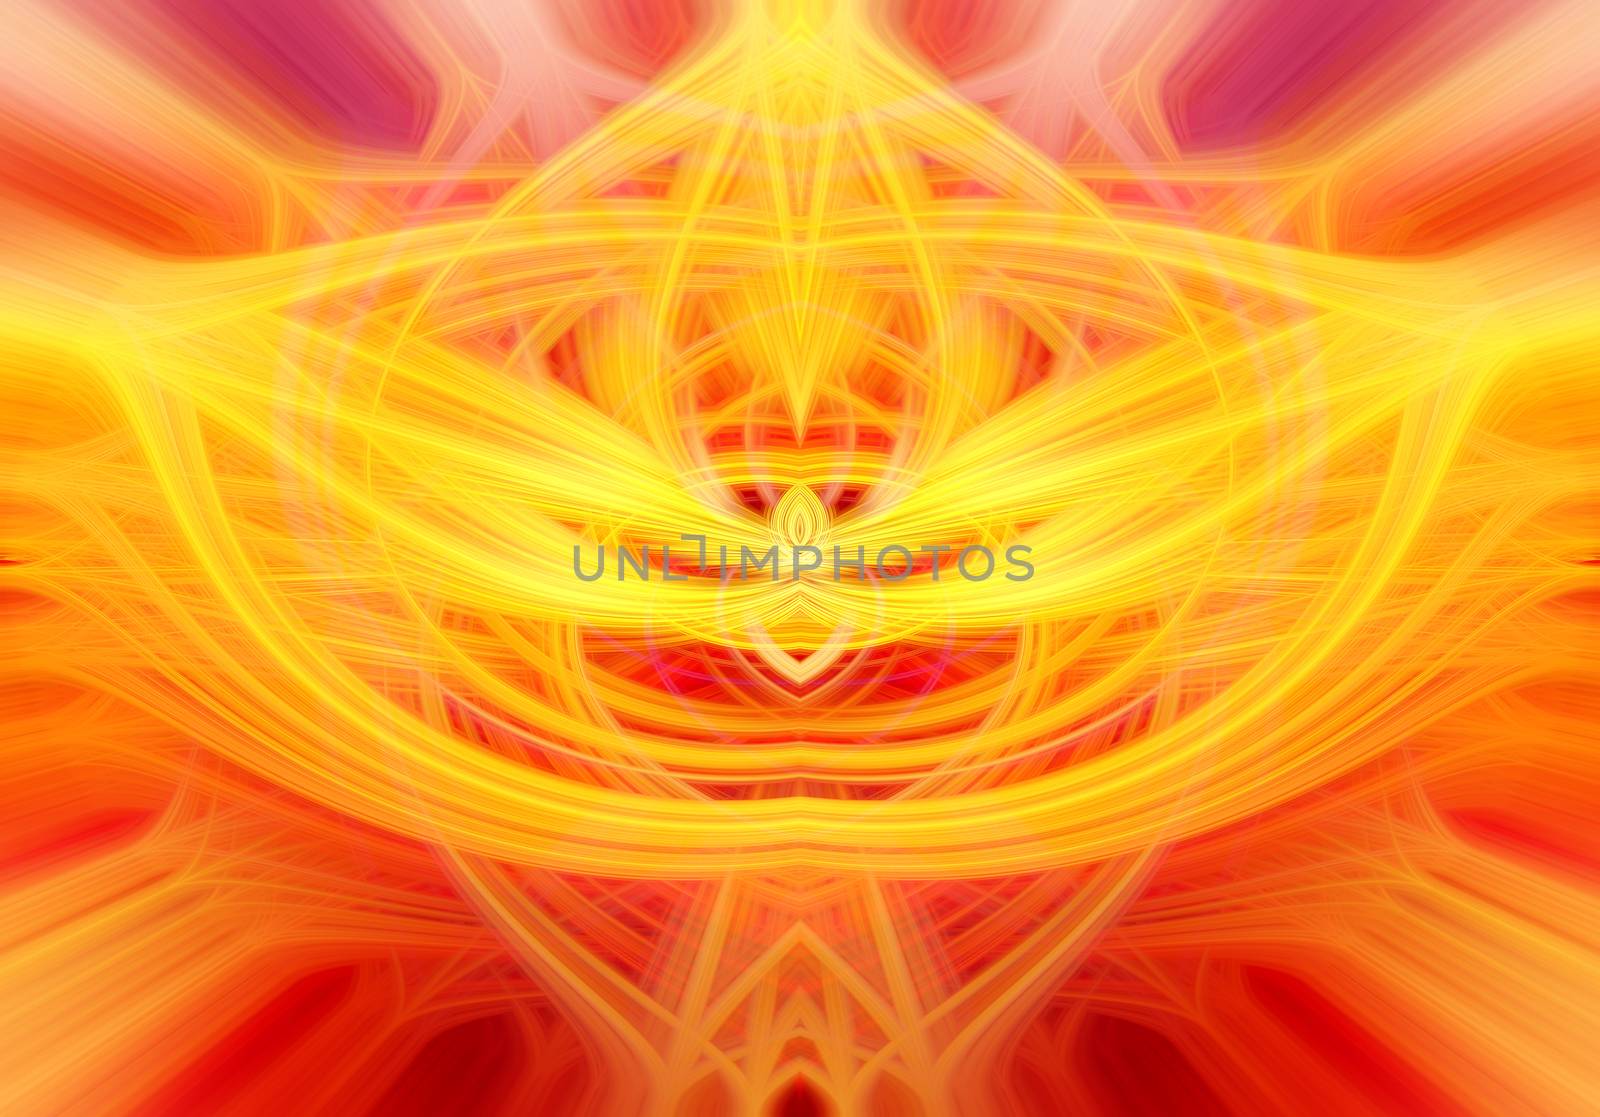 Beautiful abstract intertwined glowing 3d fibers forming a shape of star, sparkle, flame, flower, interlinked hearts. Yellow, orange, and red colors. Illustration.